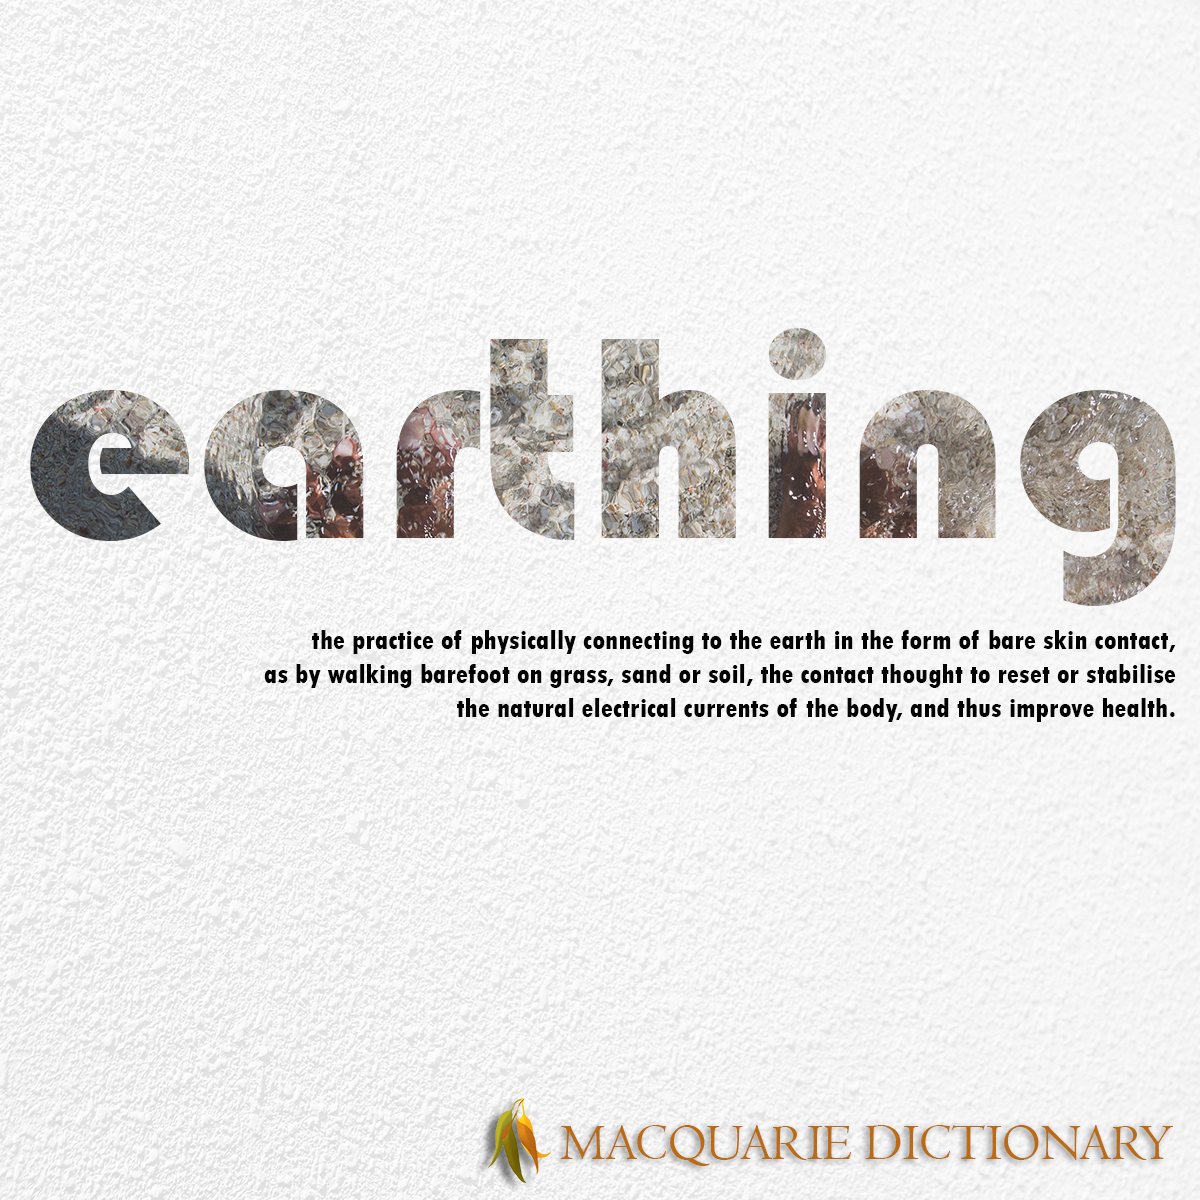 Image of Macquarie Dictionary Word of the Year - earthing - the practice of physically connecting to the earth in the form of bare skin contact, as by walking barefoot on grass, sand or soil, the contact thought to reset or stabilise the natural electrical currents of the body, and thus improve health. 